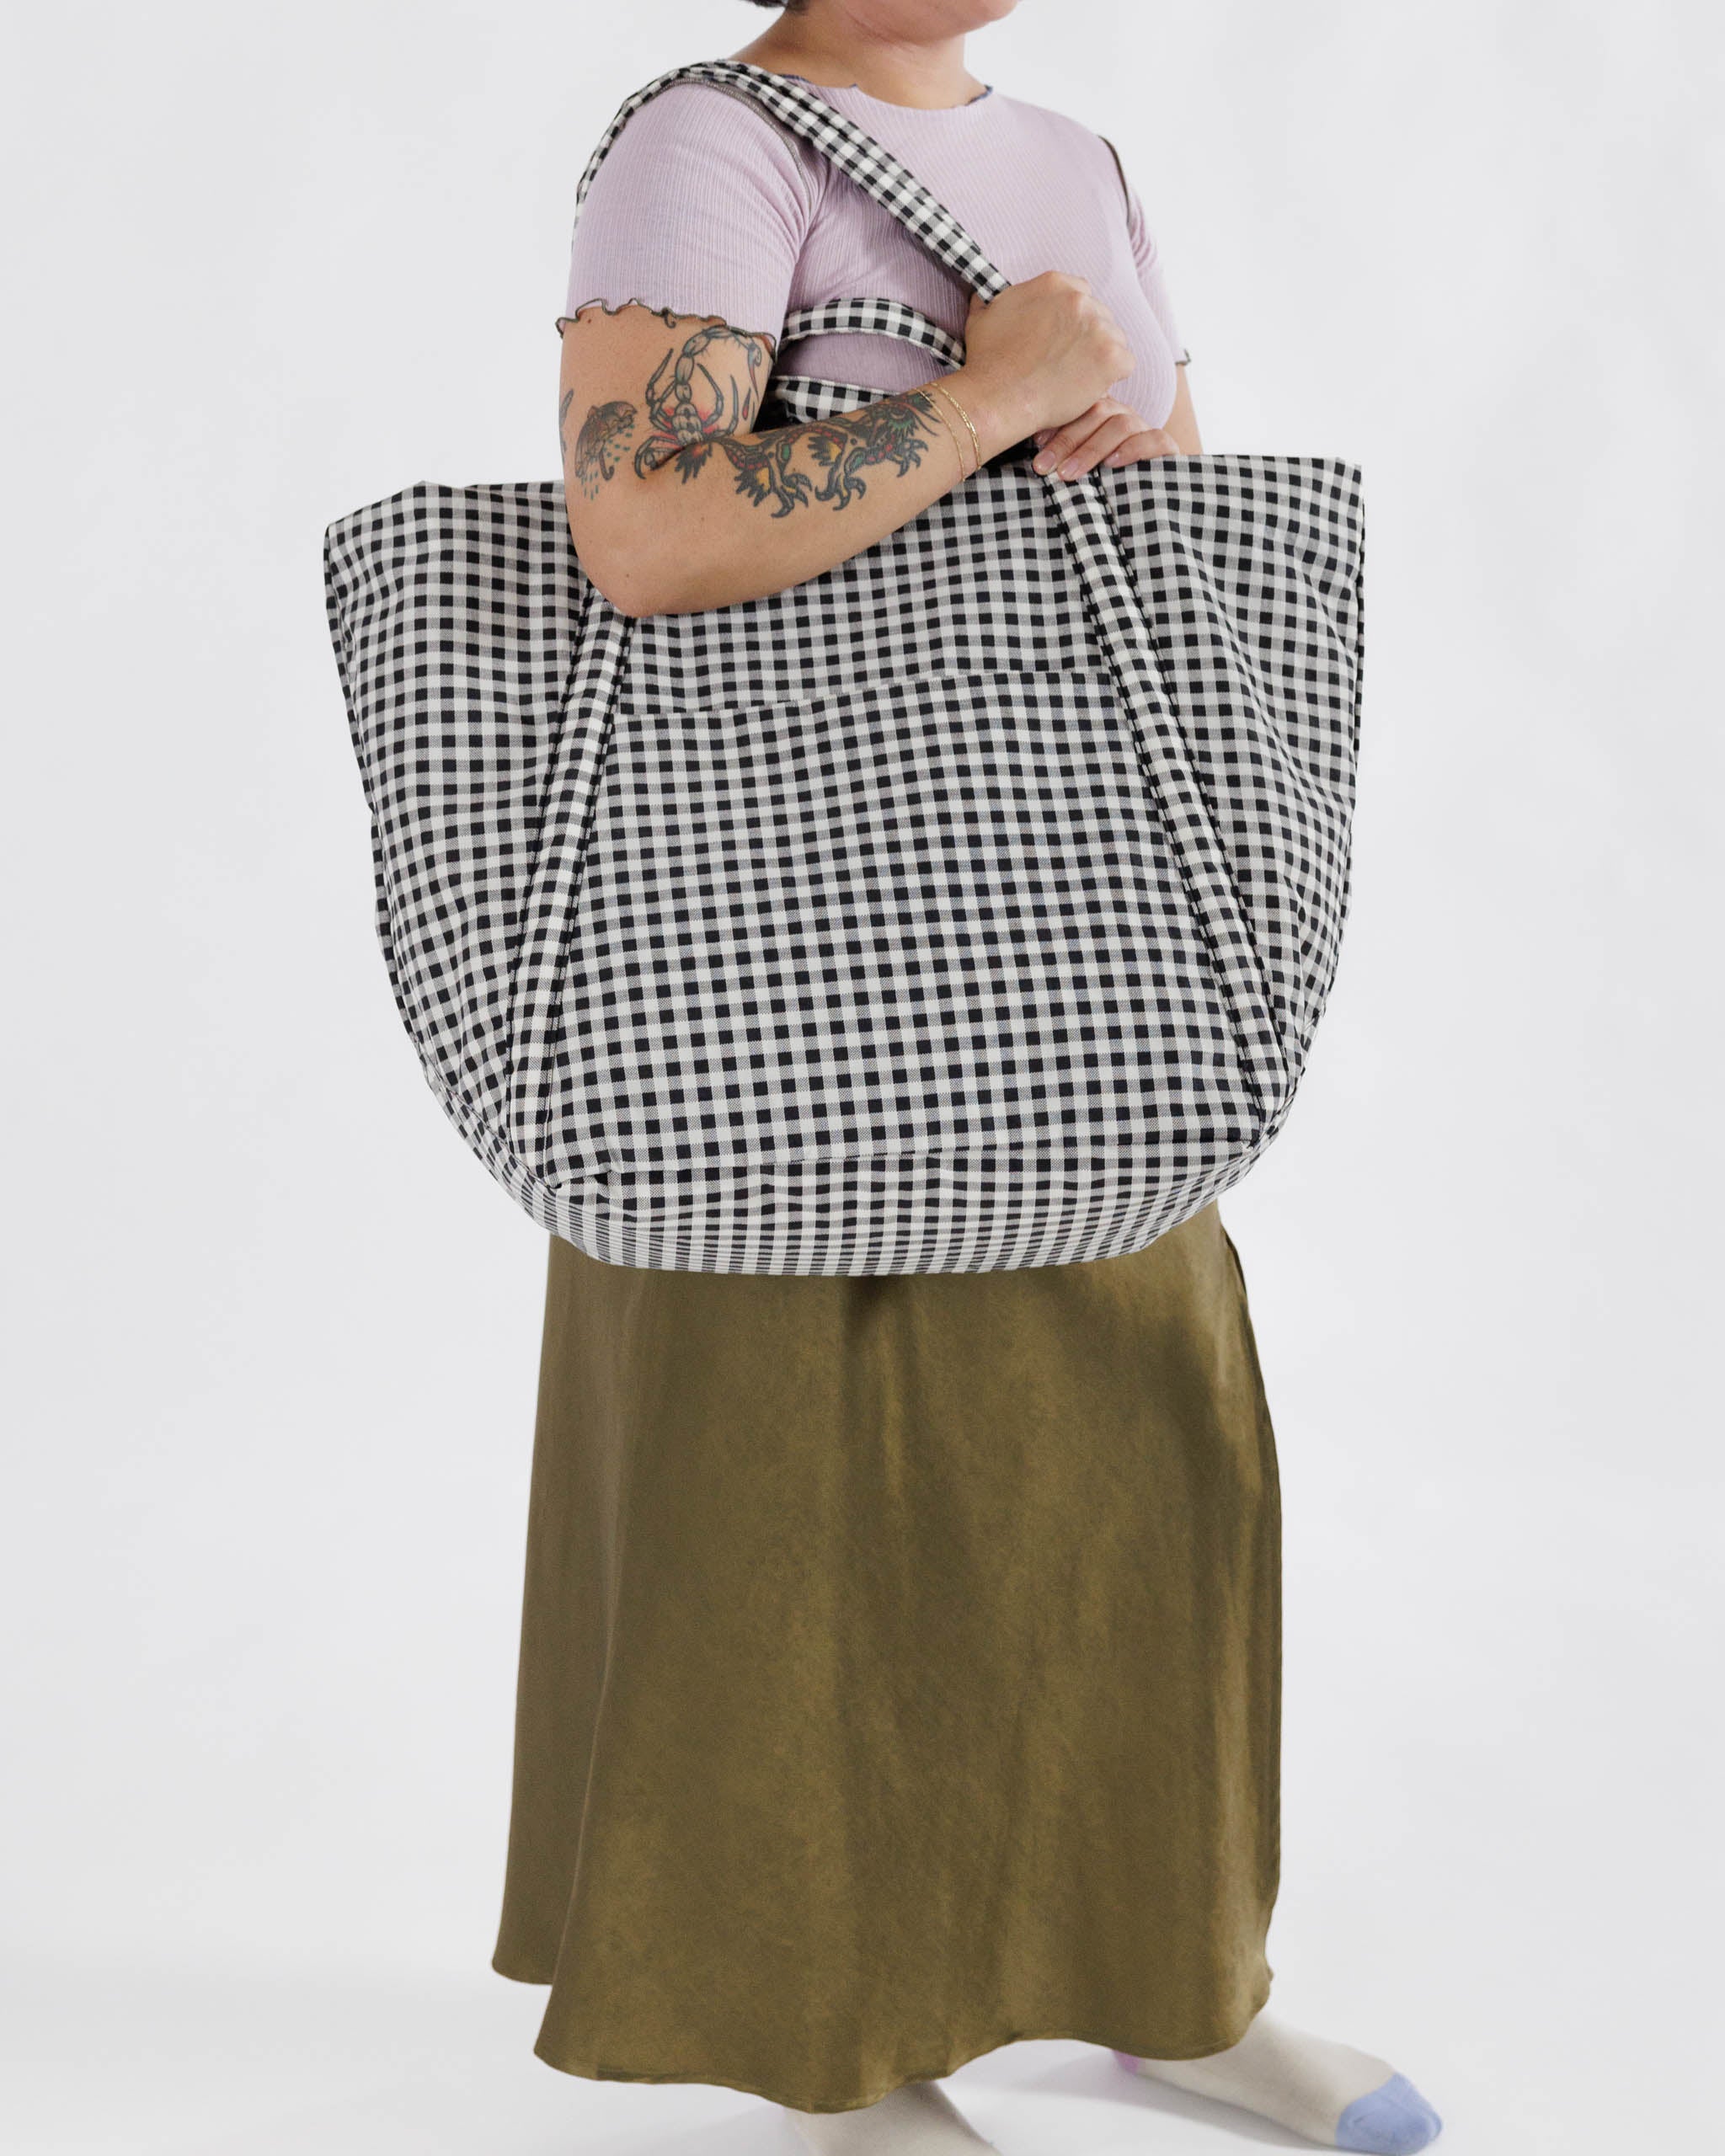 Travel Cloud Bag (Black and White Gingham)